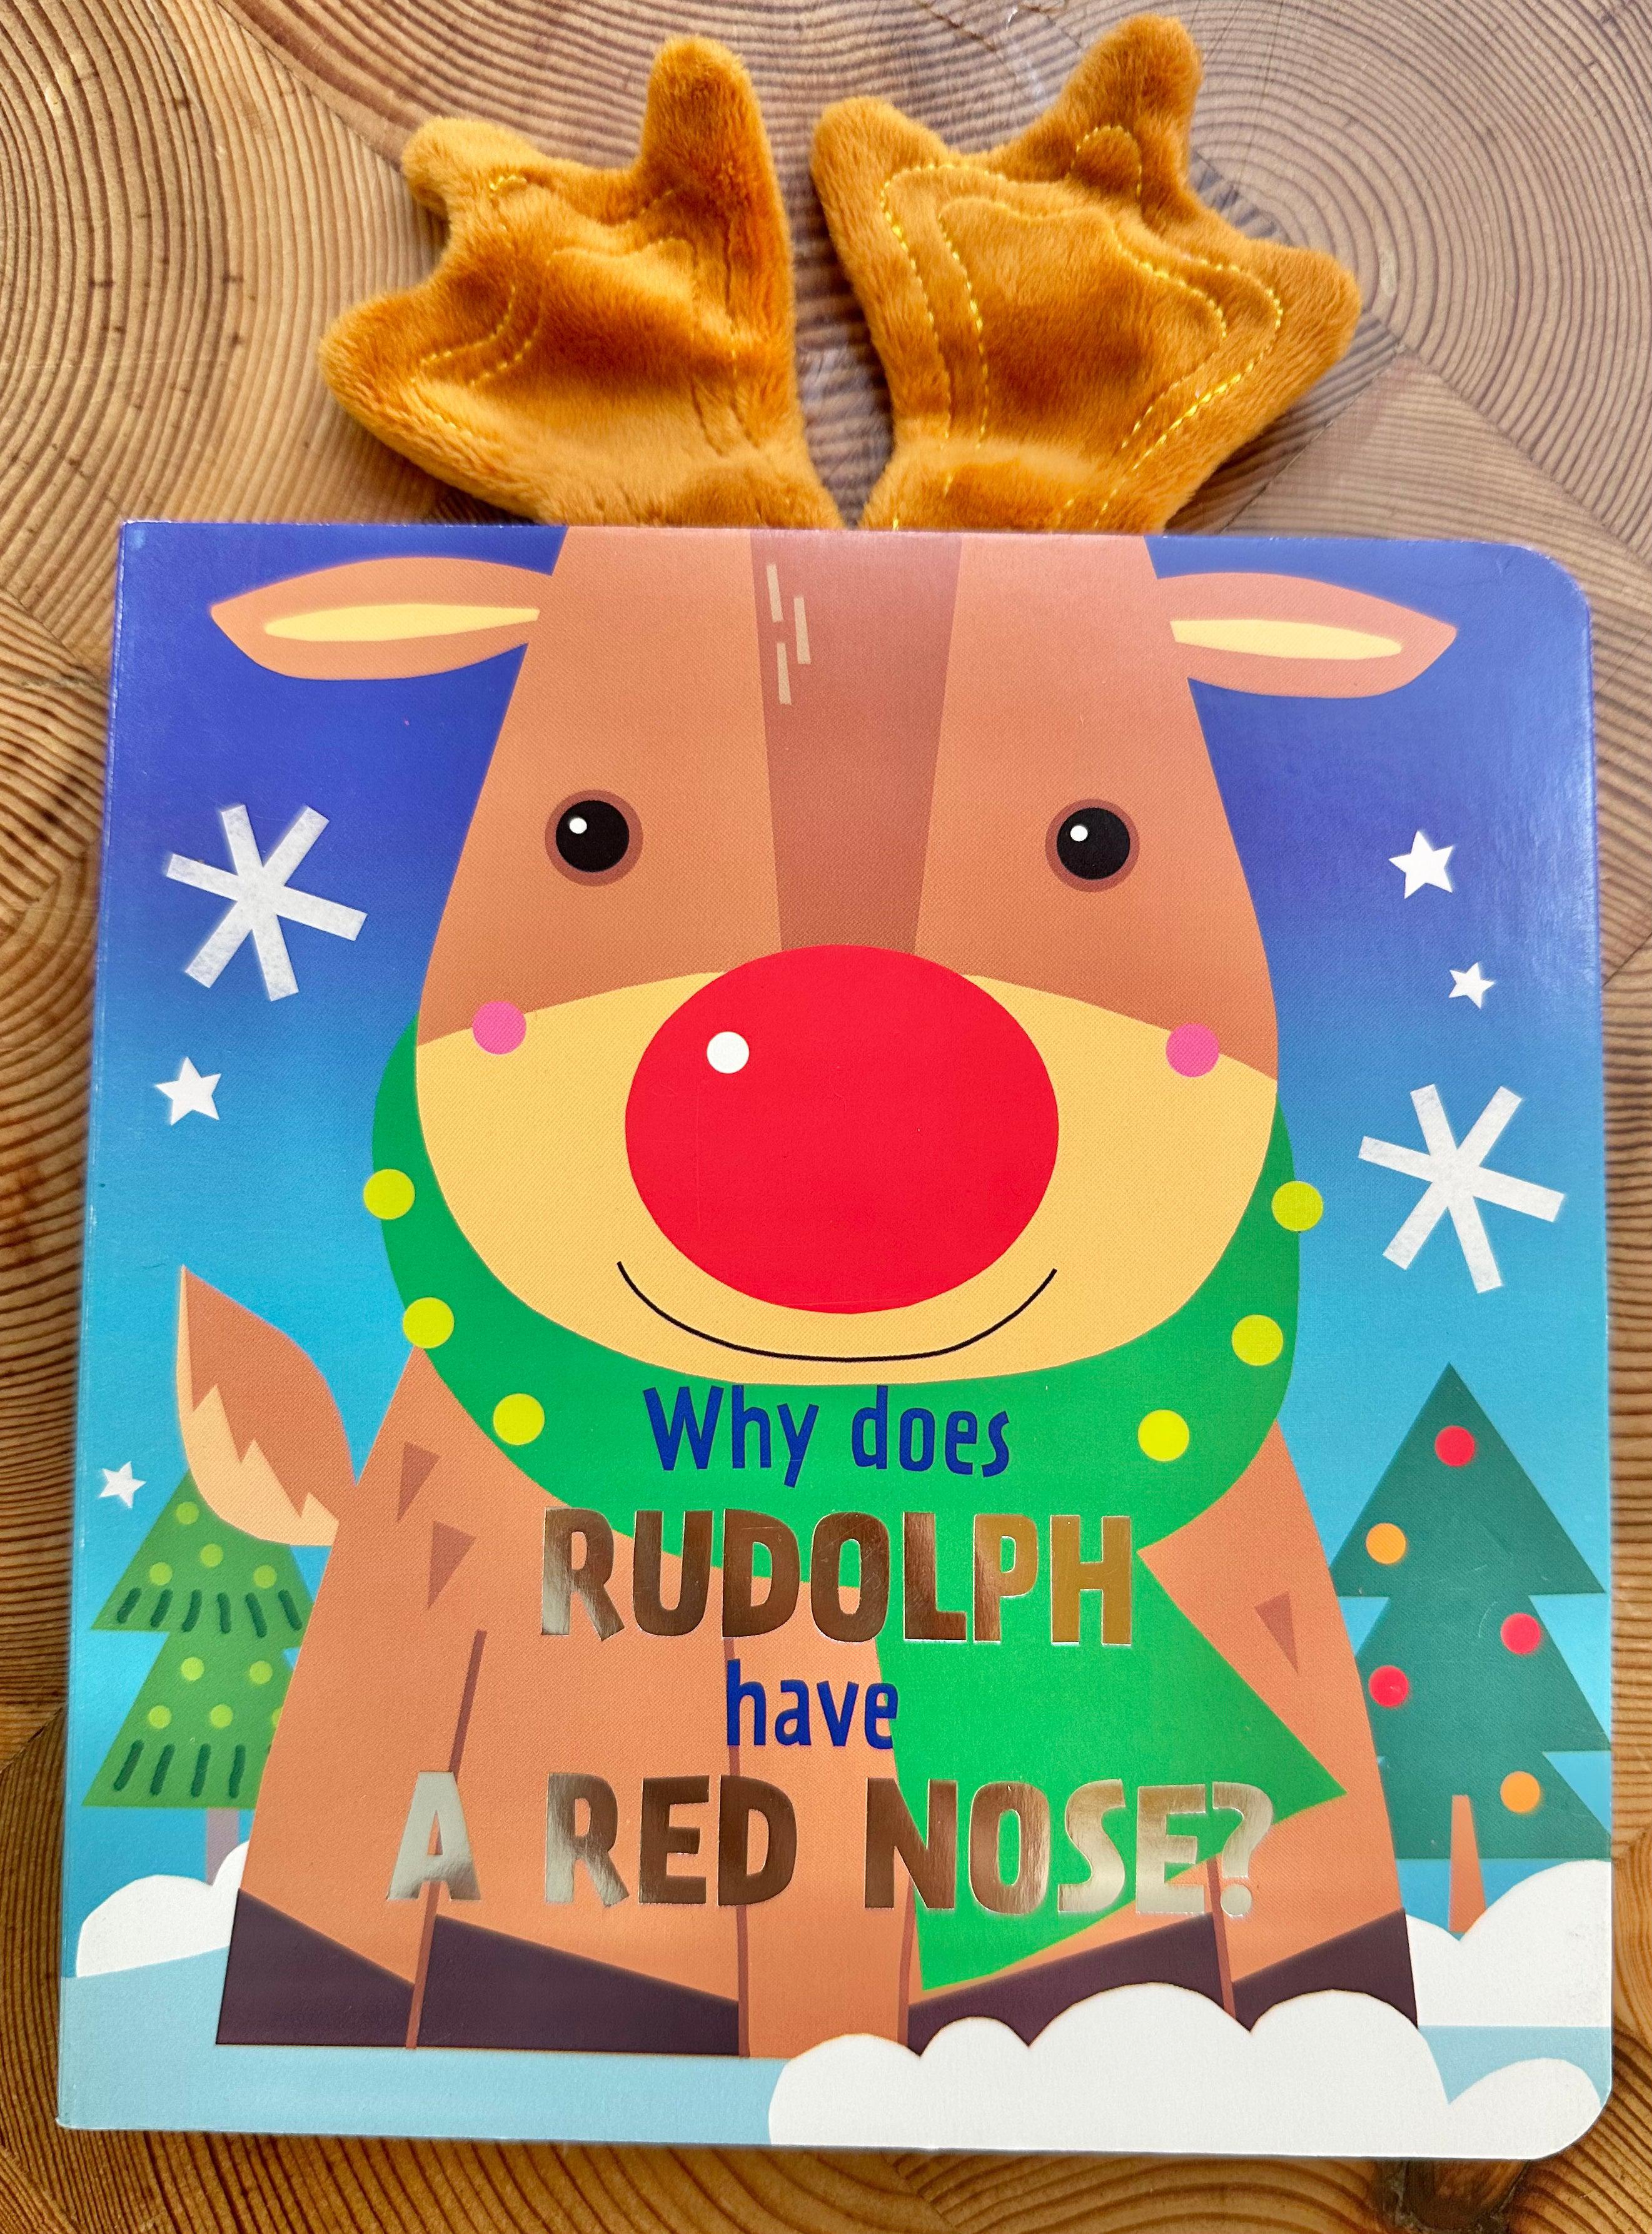 Why does Rudolph have a red nose?